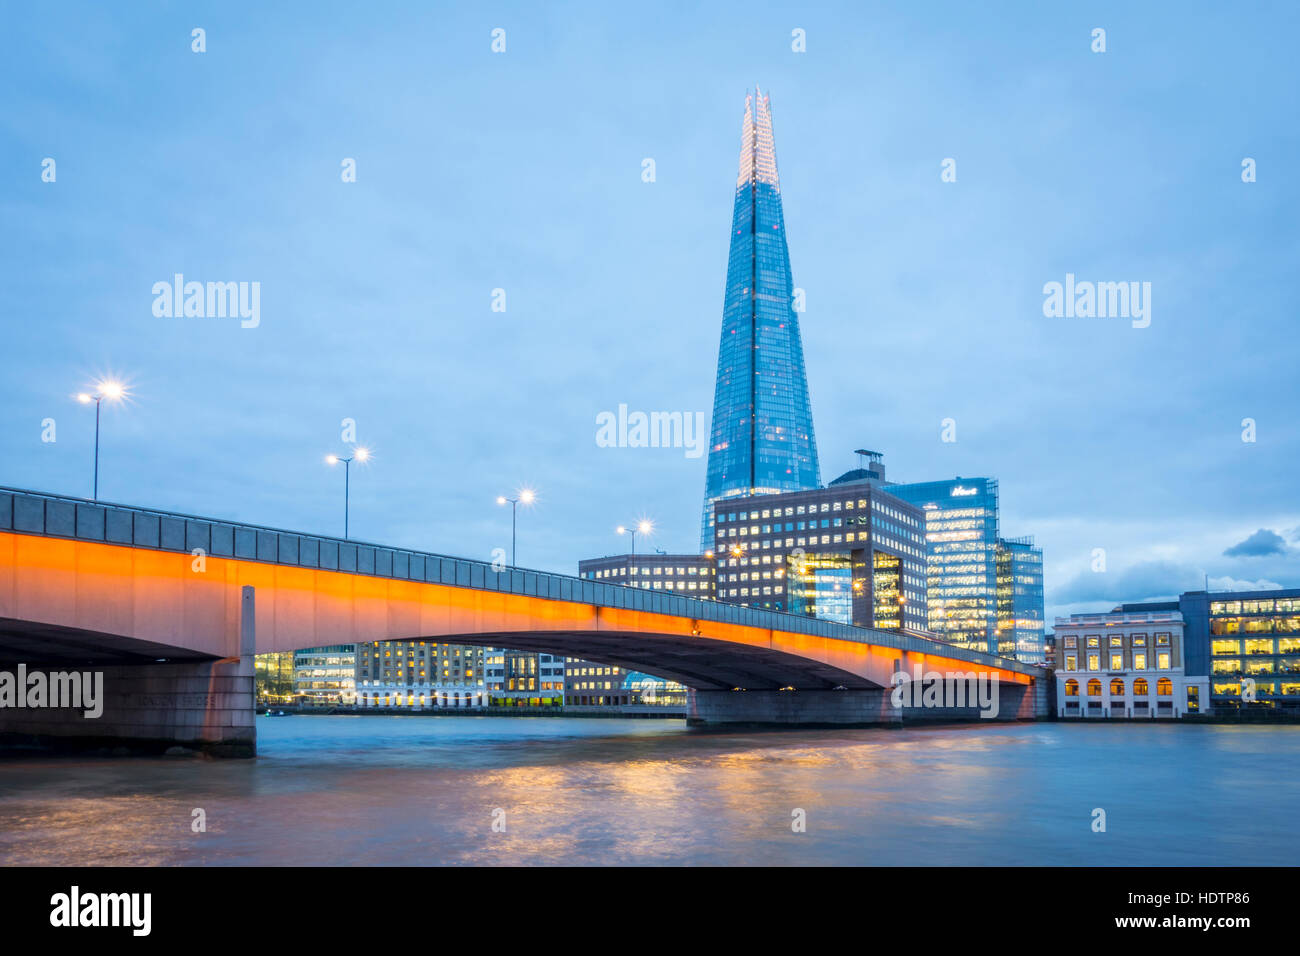 London skyline at dusk with London Bridge and The Shard in view over the River Thames Stock Photo